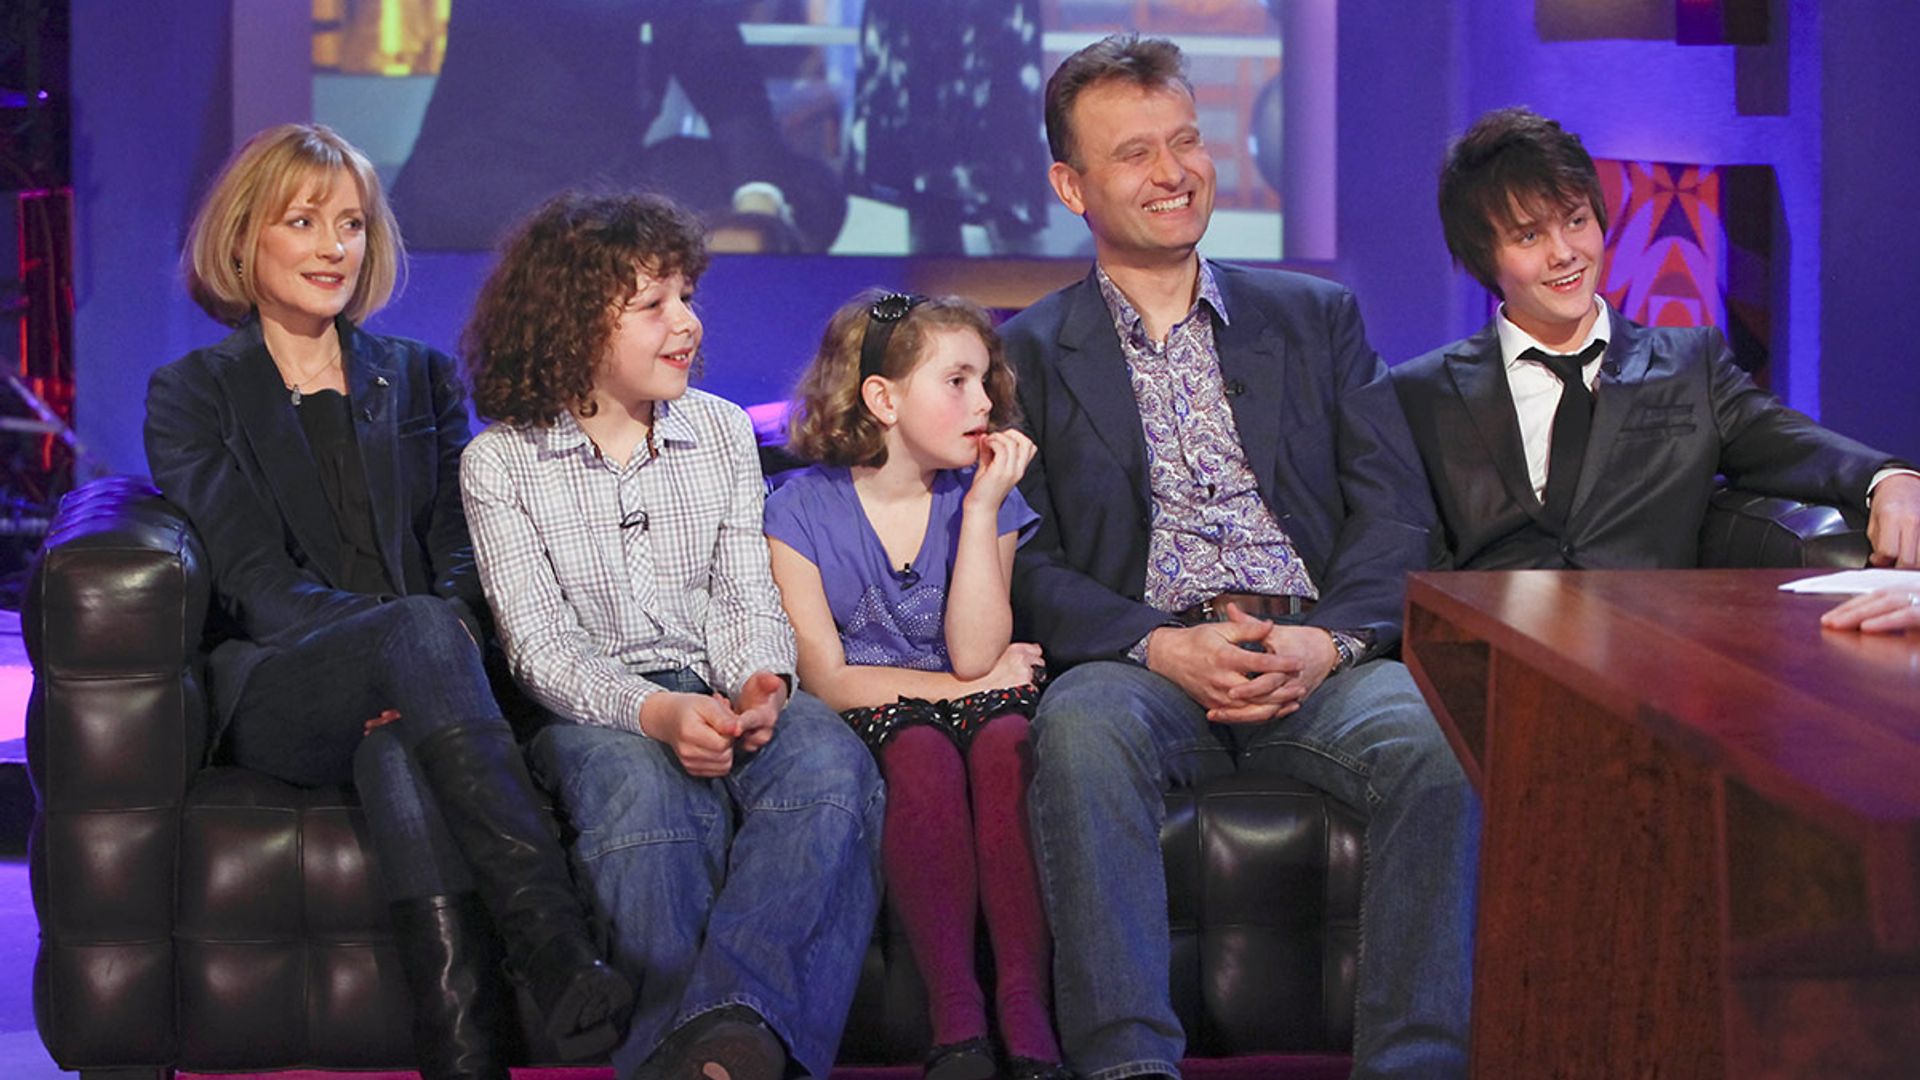 Outnumbered then and now: see how much the cast have changed.